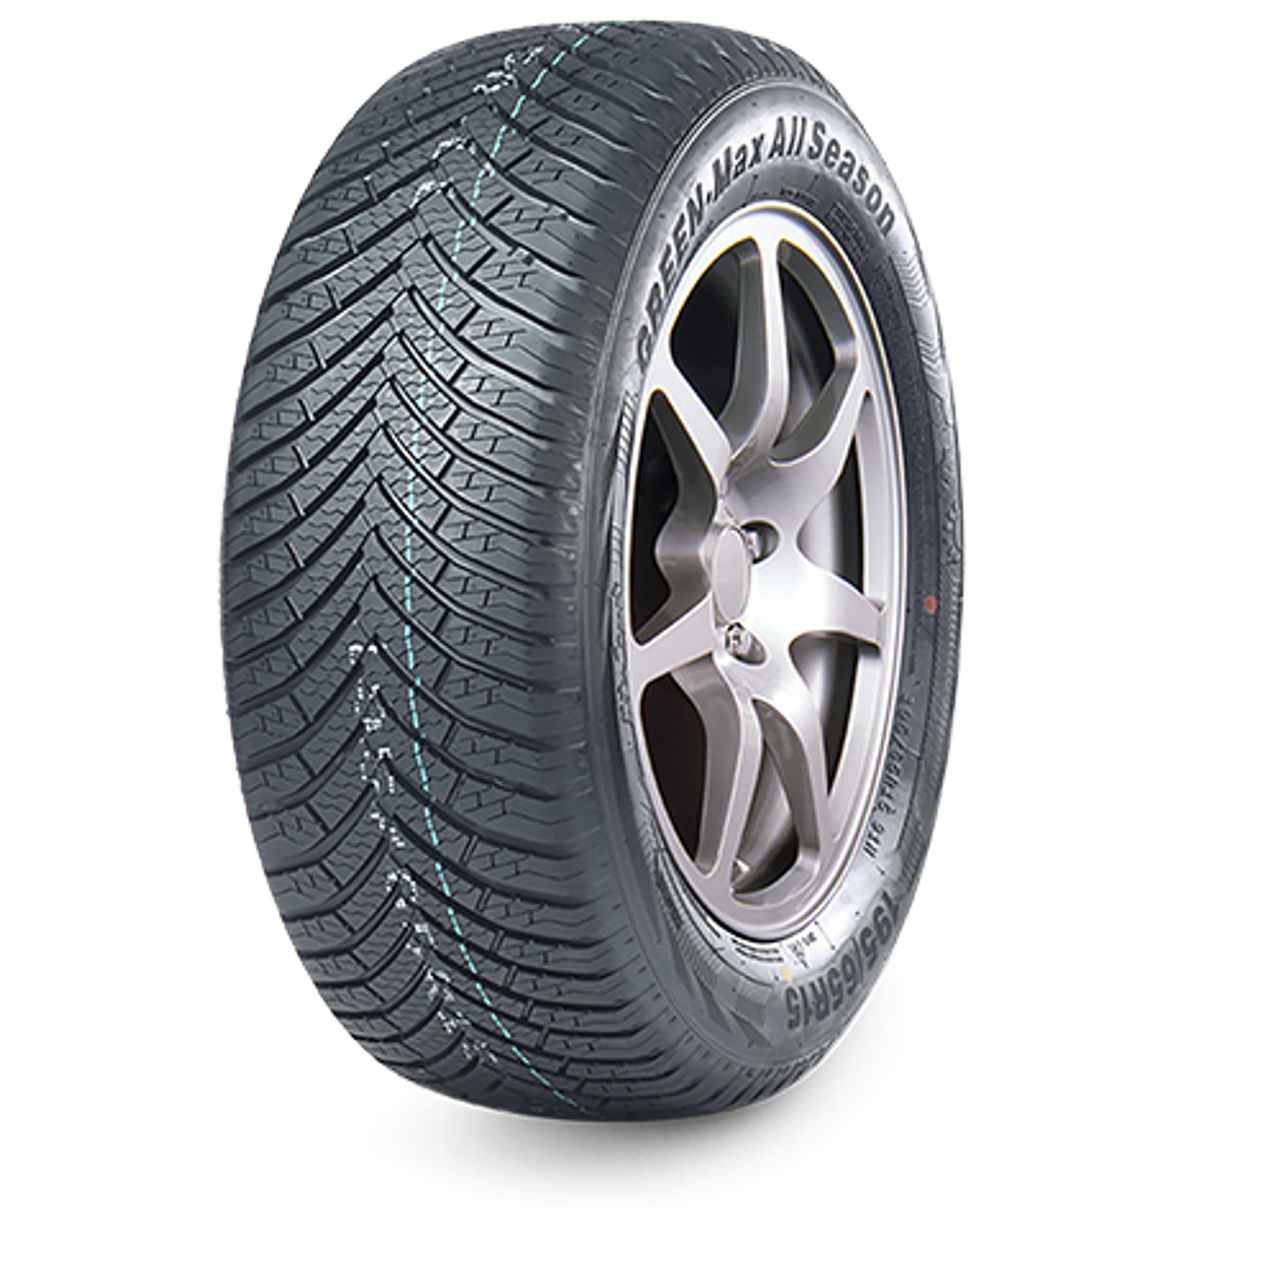 LINGLONG GREEN-MAX ALL SEASON 155/80R13 79T BSW von LINGLONG